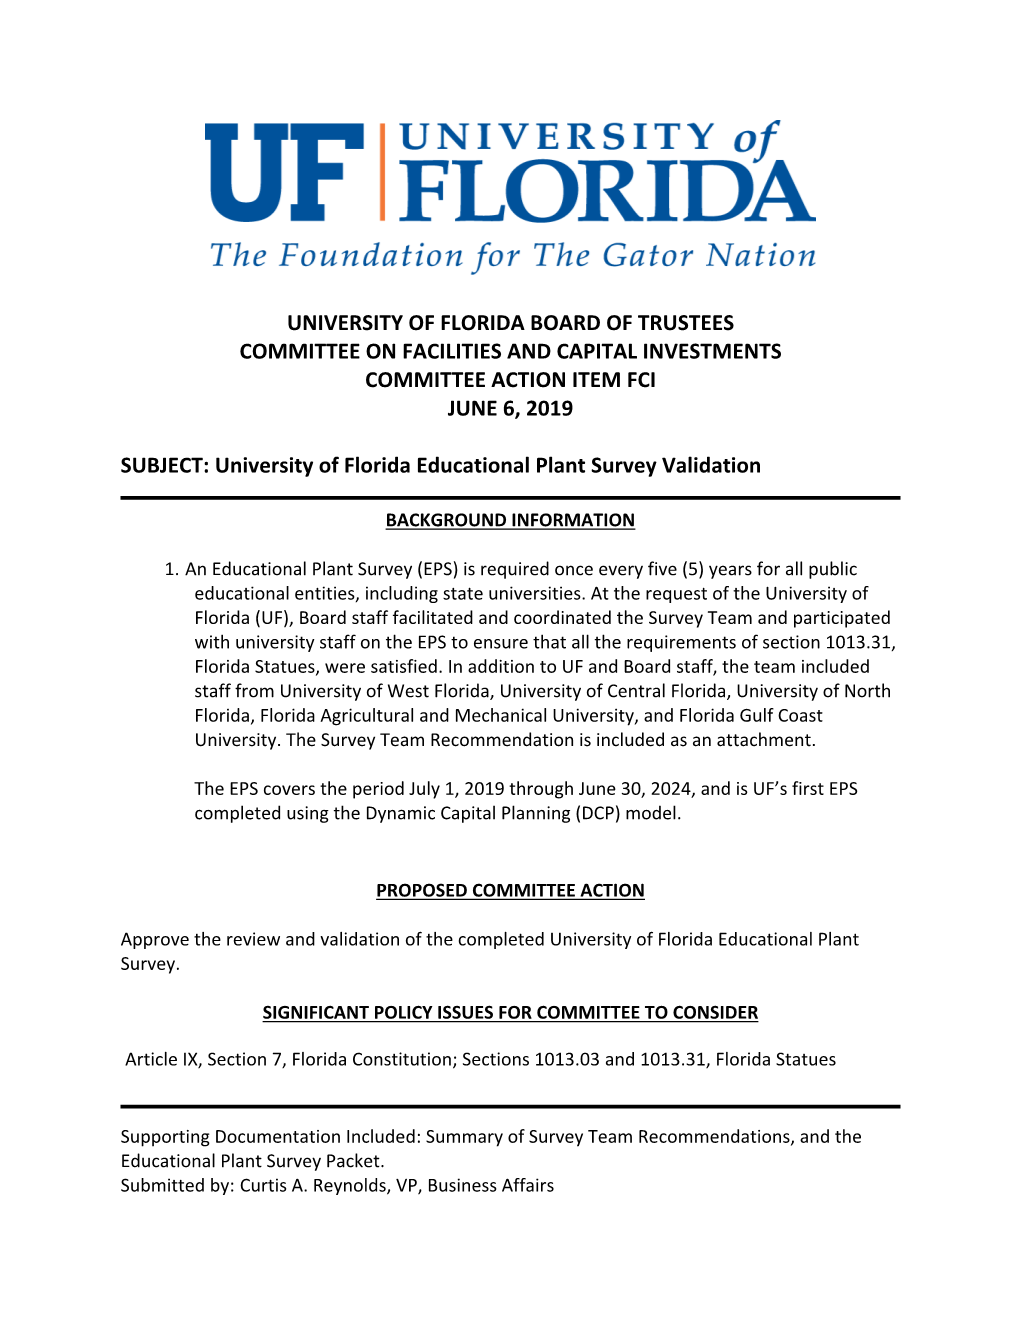 University of Florida Board of Trustees Committee on Facilities and Capital Investments Committee Action Item Fci June 6, 2019